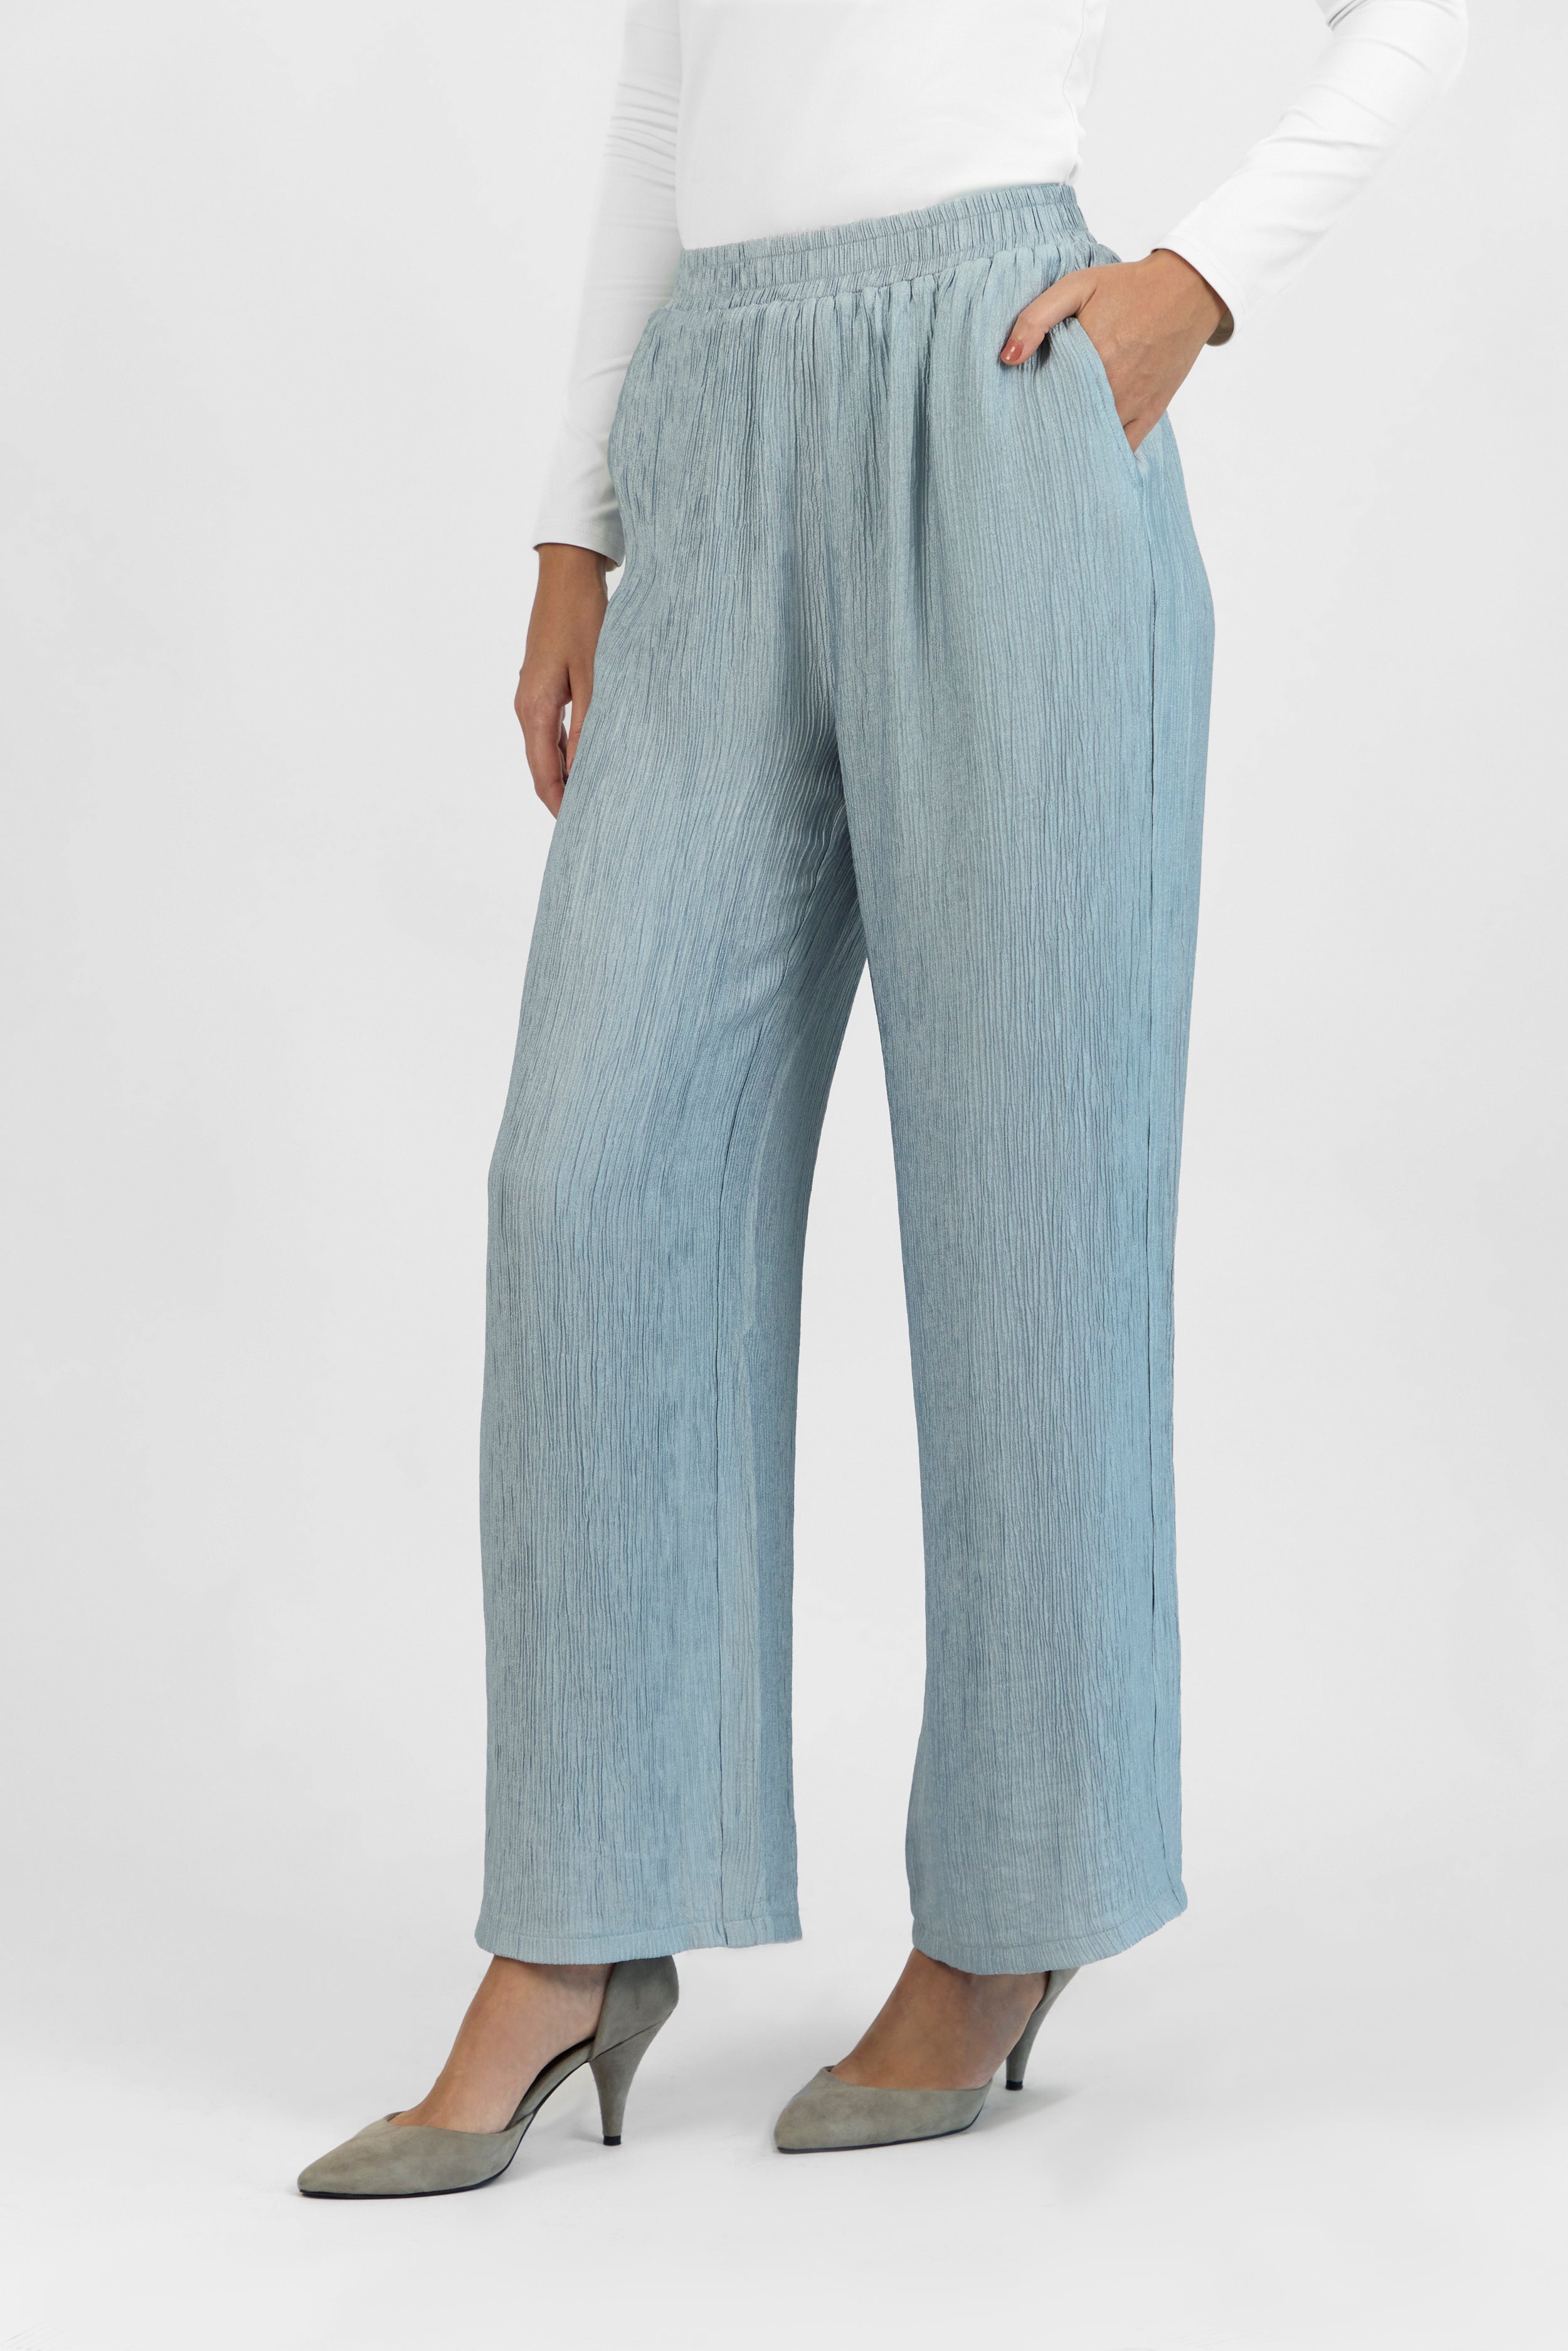 CA - Rippled Relaxed Fit Pants - Icy Blue